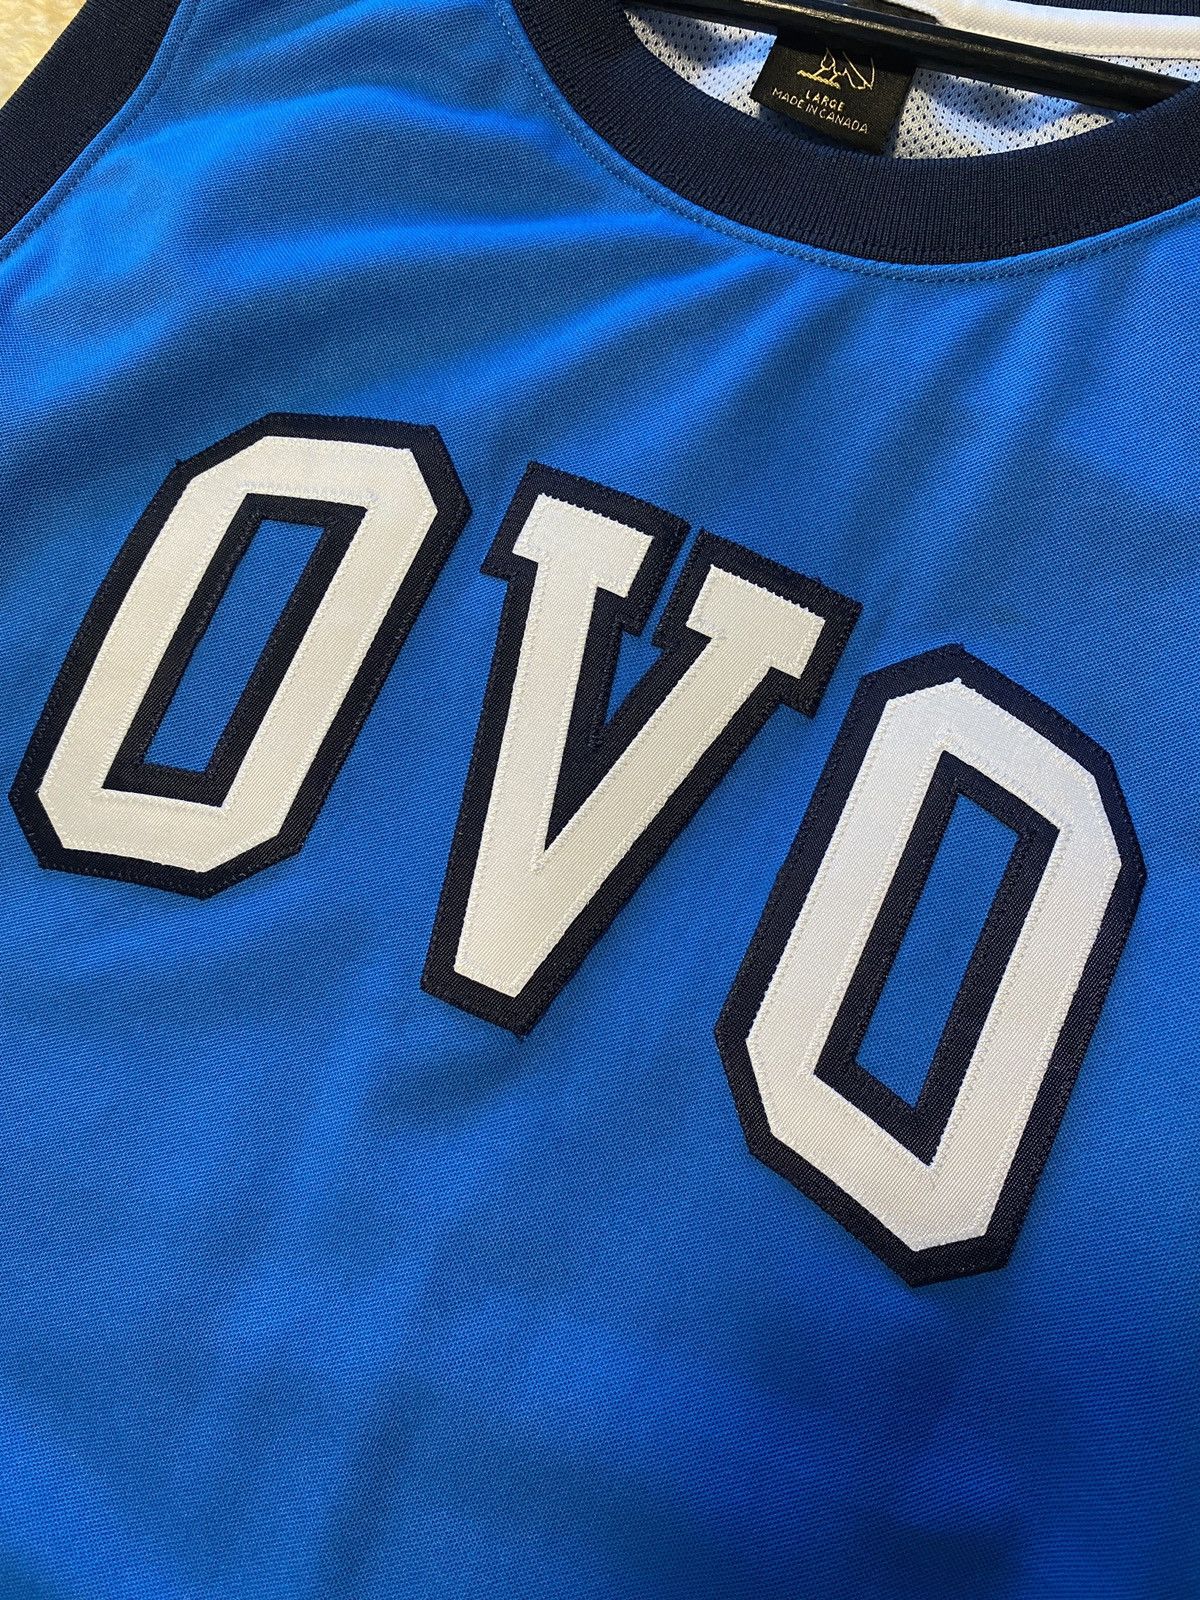 Octobers Very Own FINAL DROP BEFORE REMOVAL‼️ OVO Basketball Jersey - Blue Size US L / EU 52-54 / 3 - 2 Preview